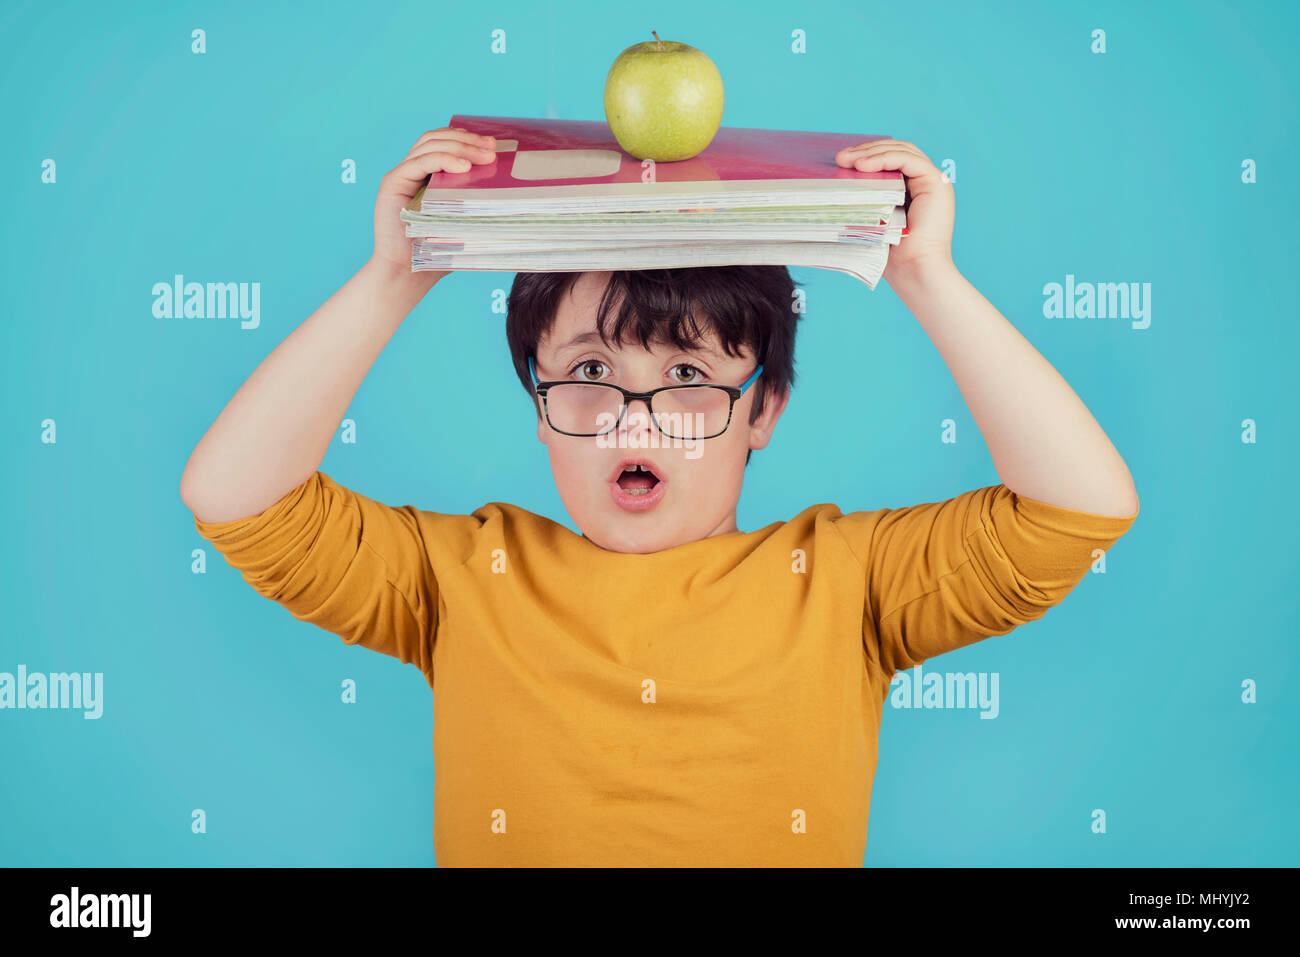 surprised boy with books and apple on blue background Stock Photo